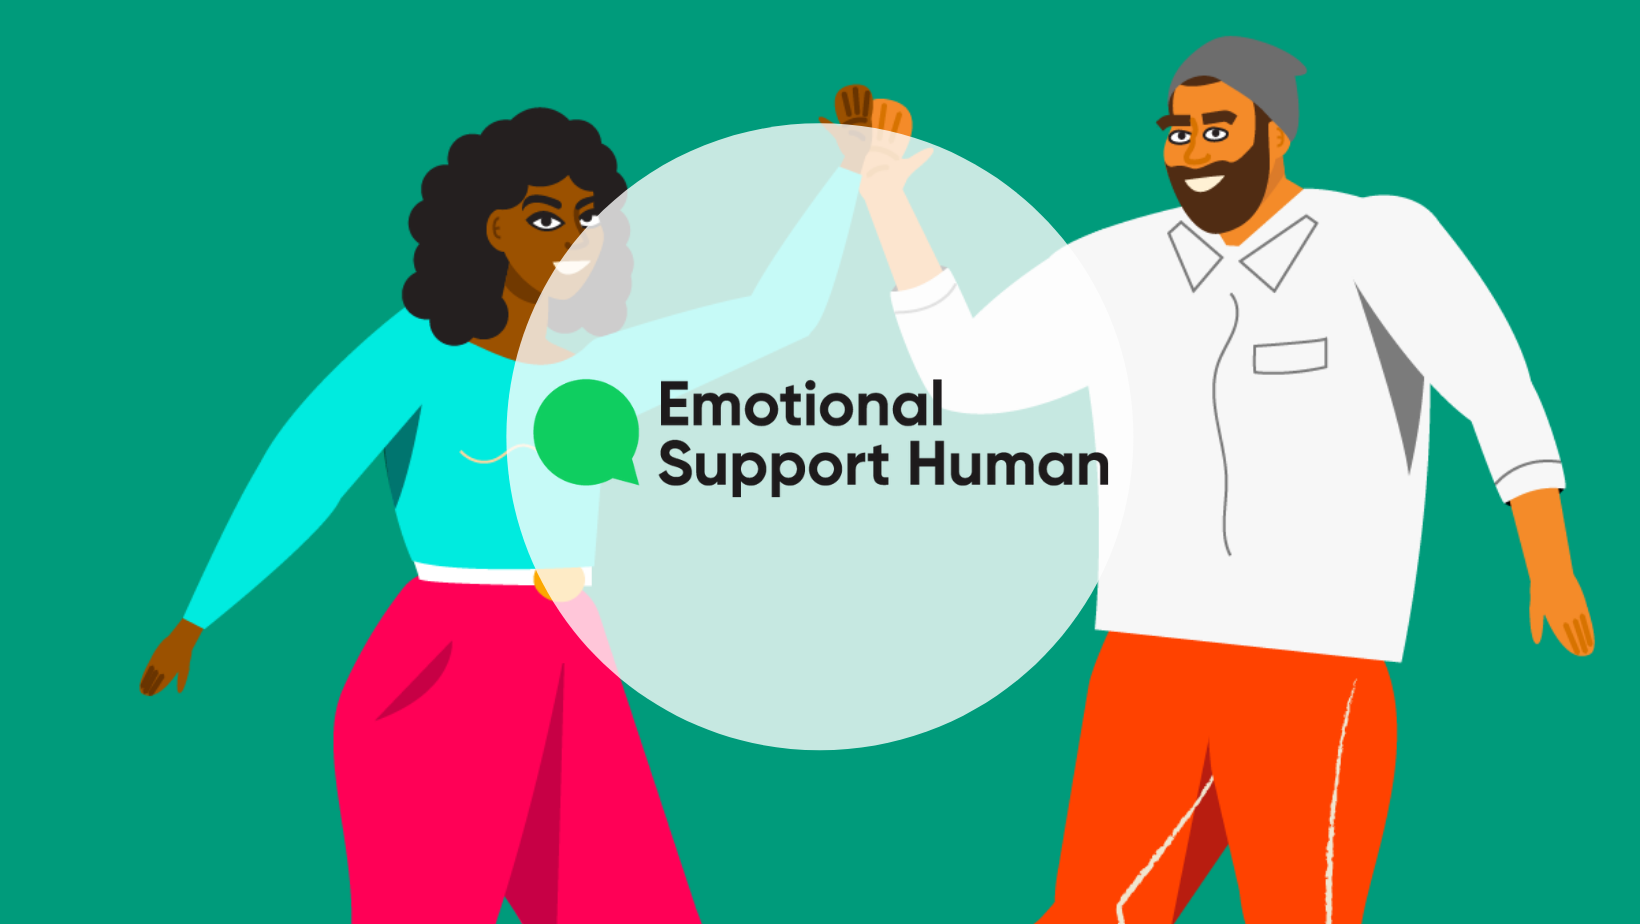 Emotional Support Human